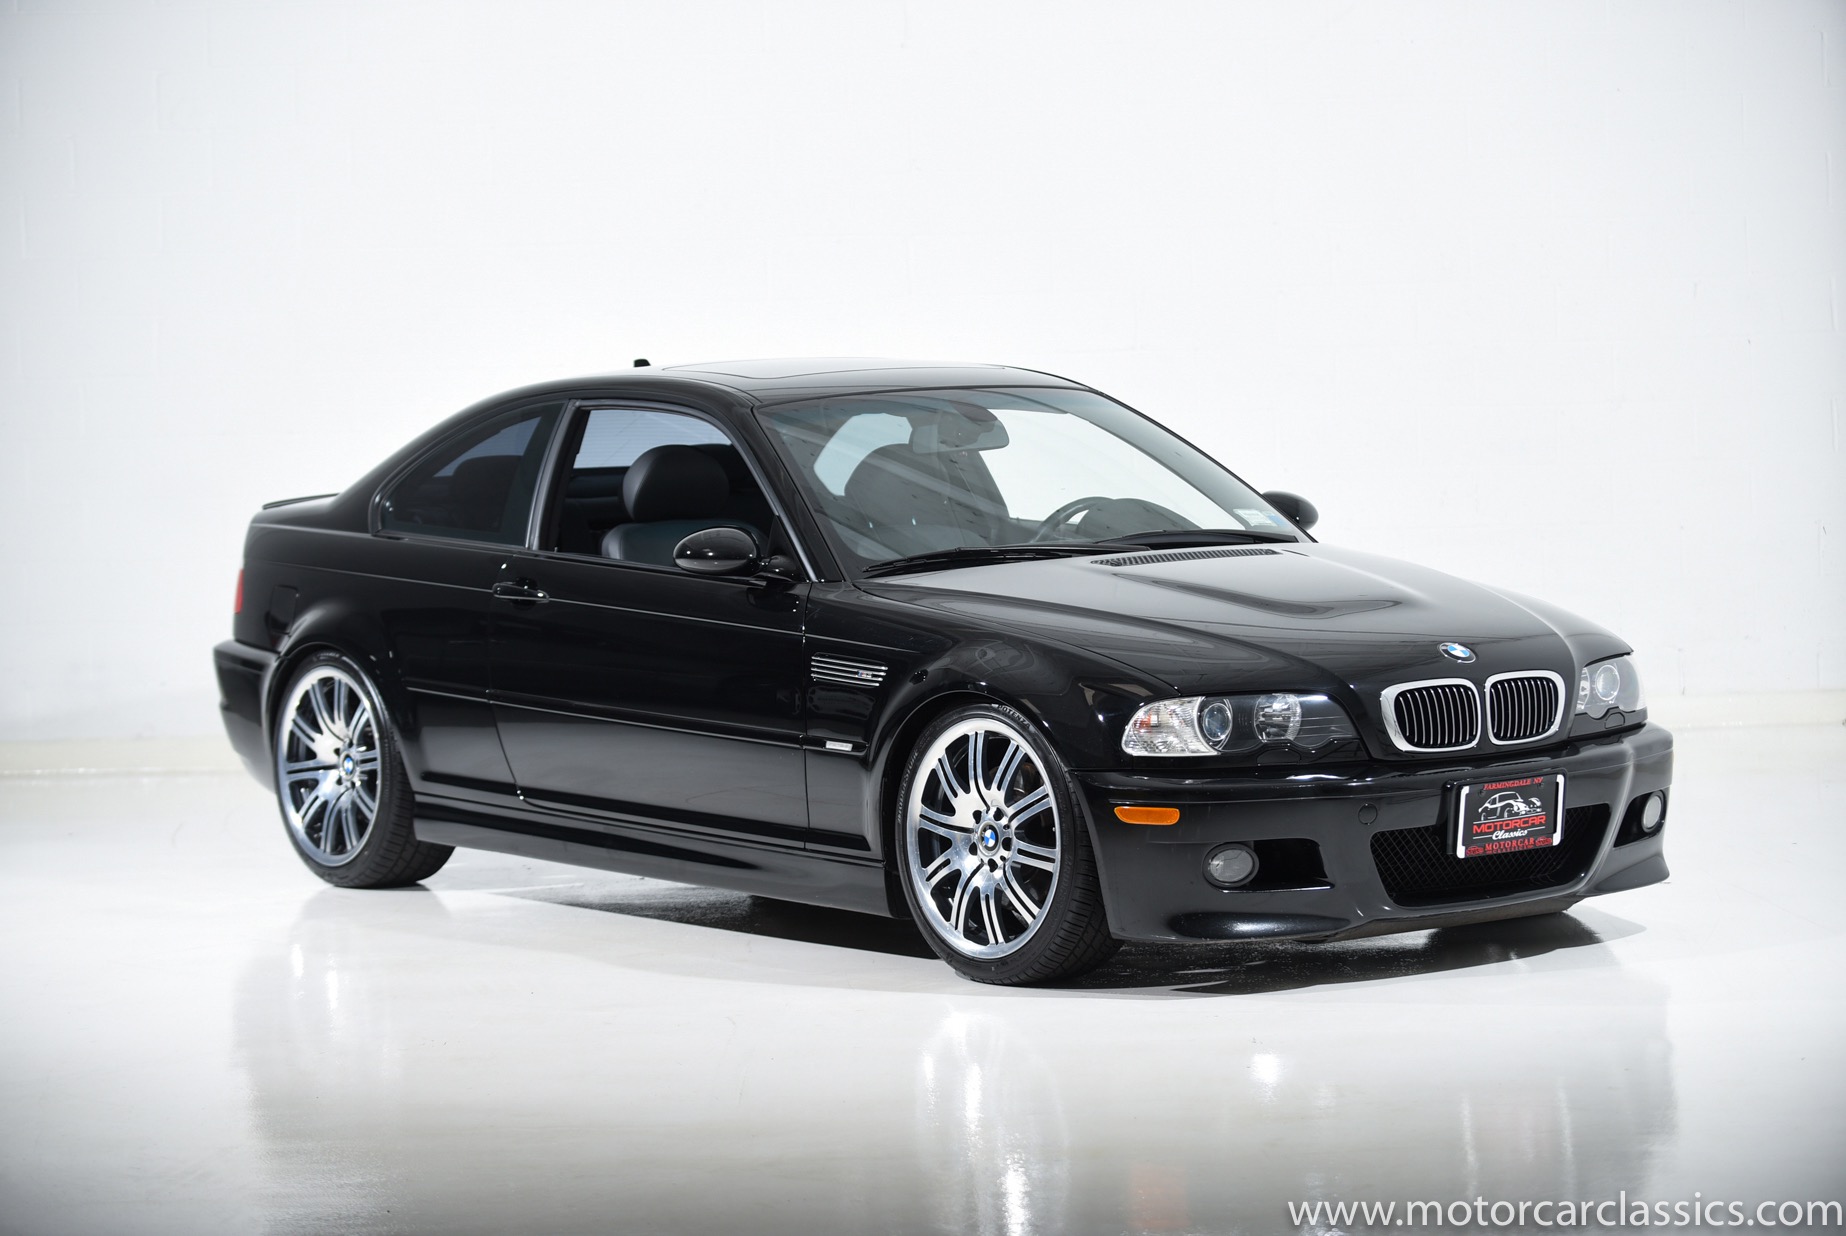 Used 2005 BMW M3 For Sale ($34,900) | Motorcar Classics Stock #1310